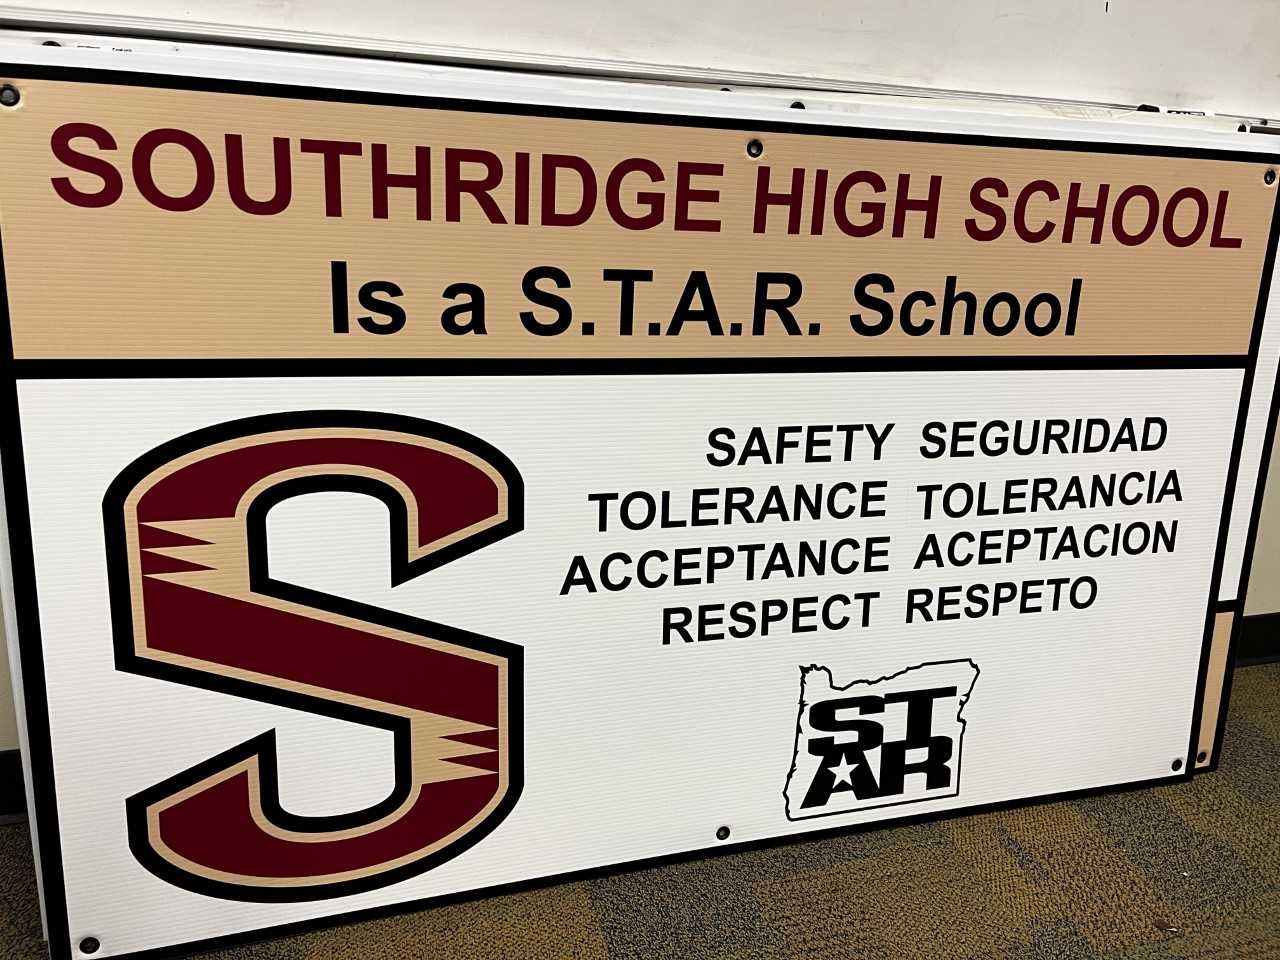 Southridge is among eight schools to earn the S.T.A.R. designation.